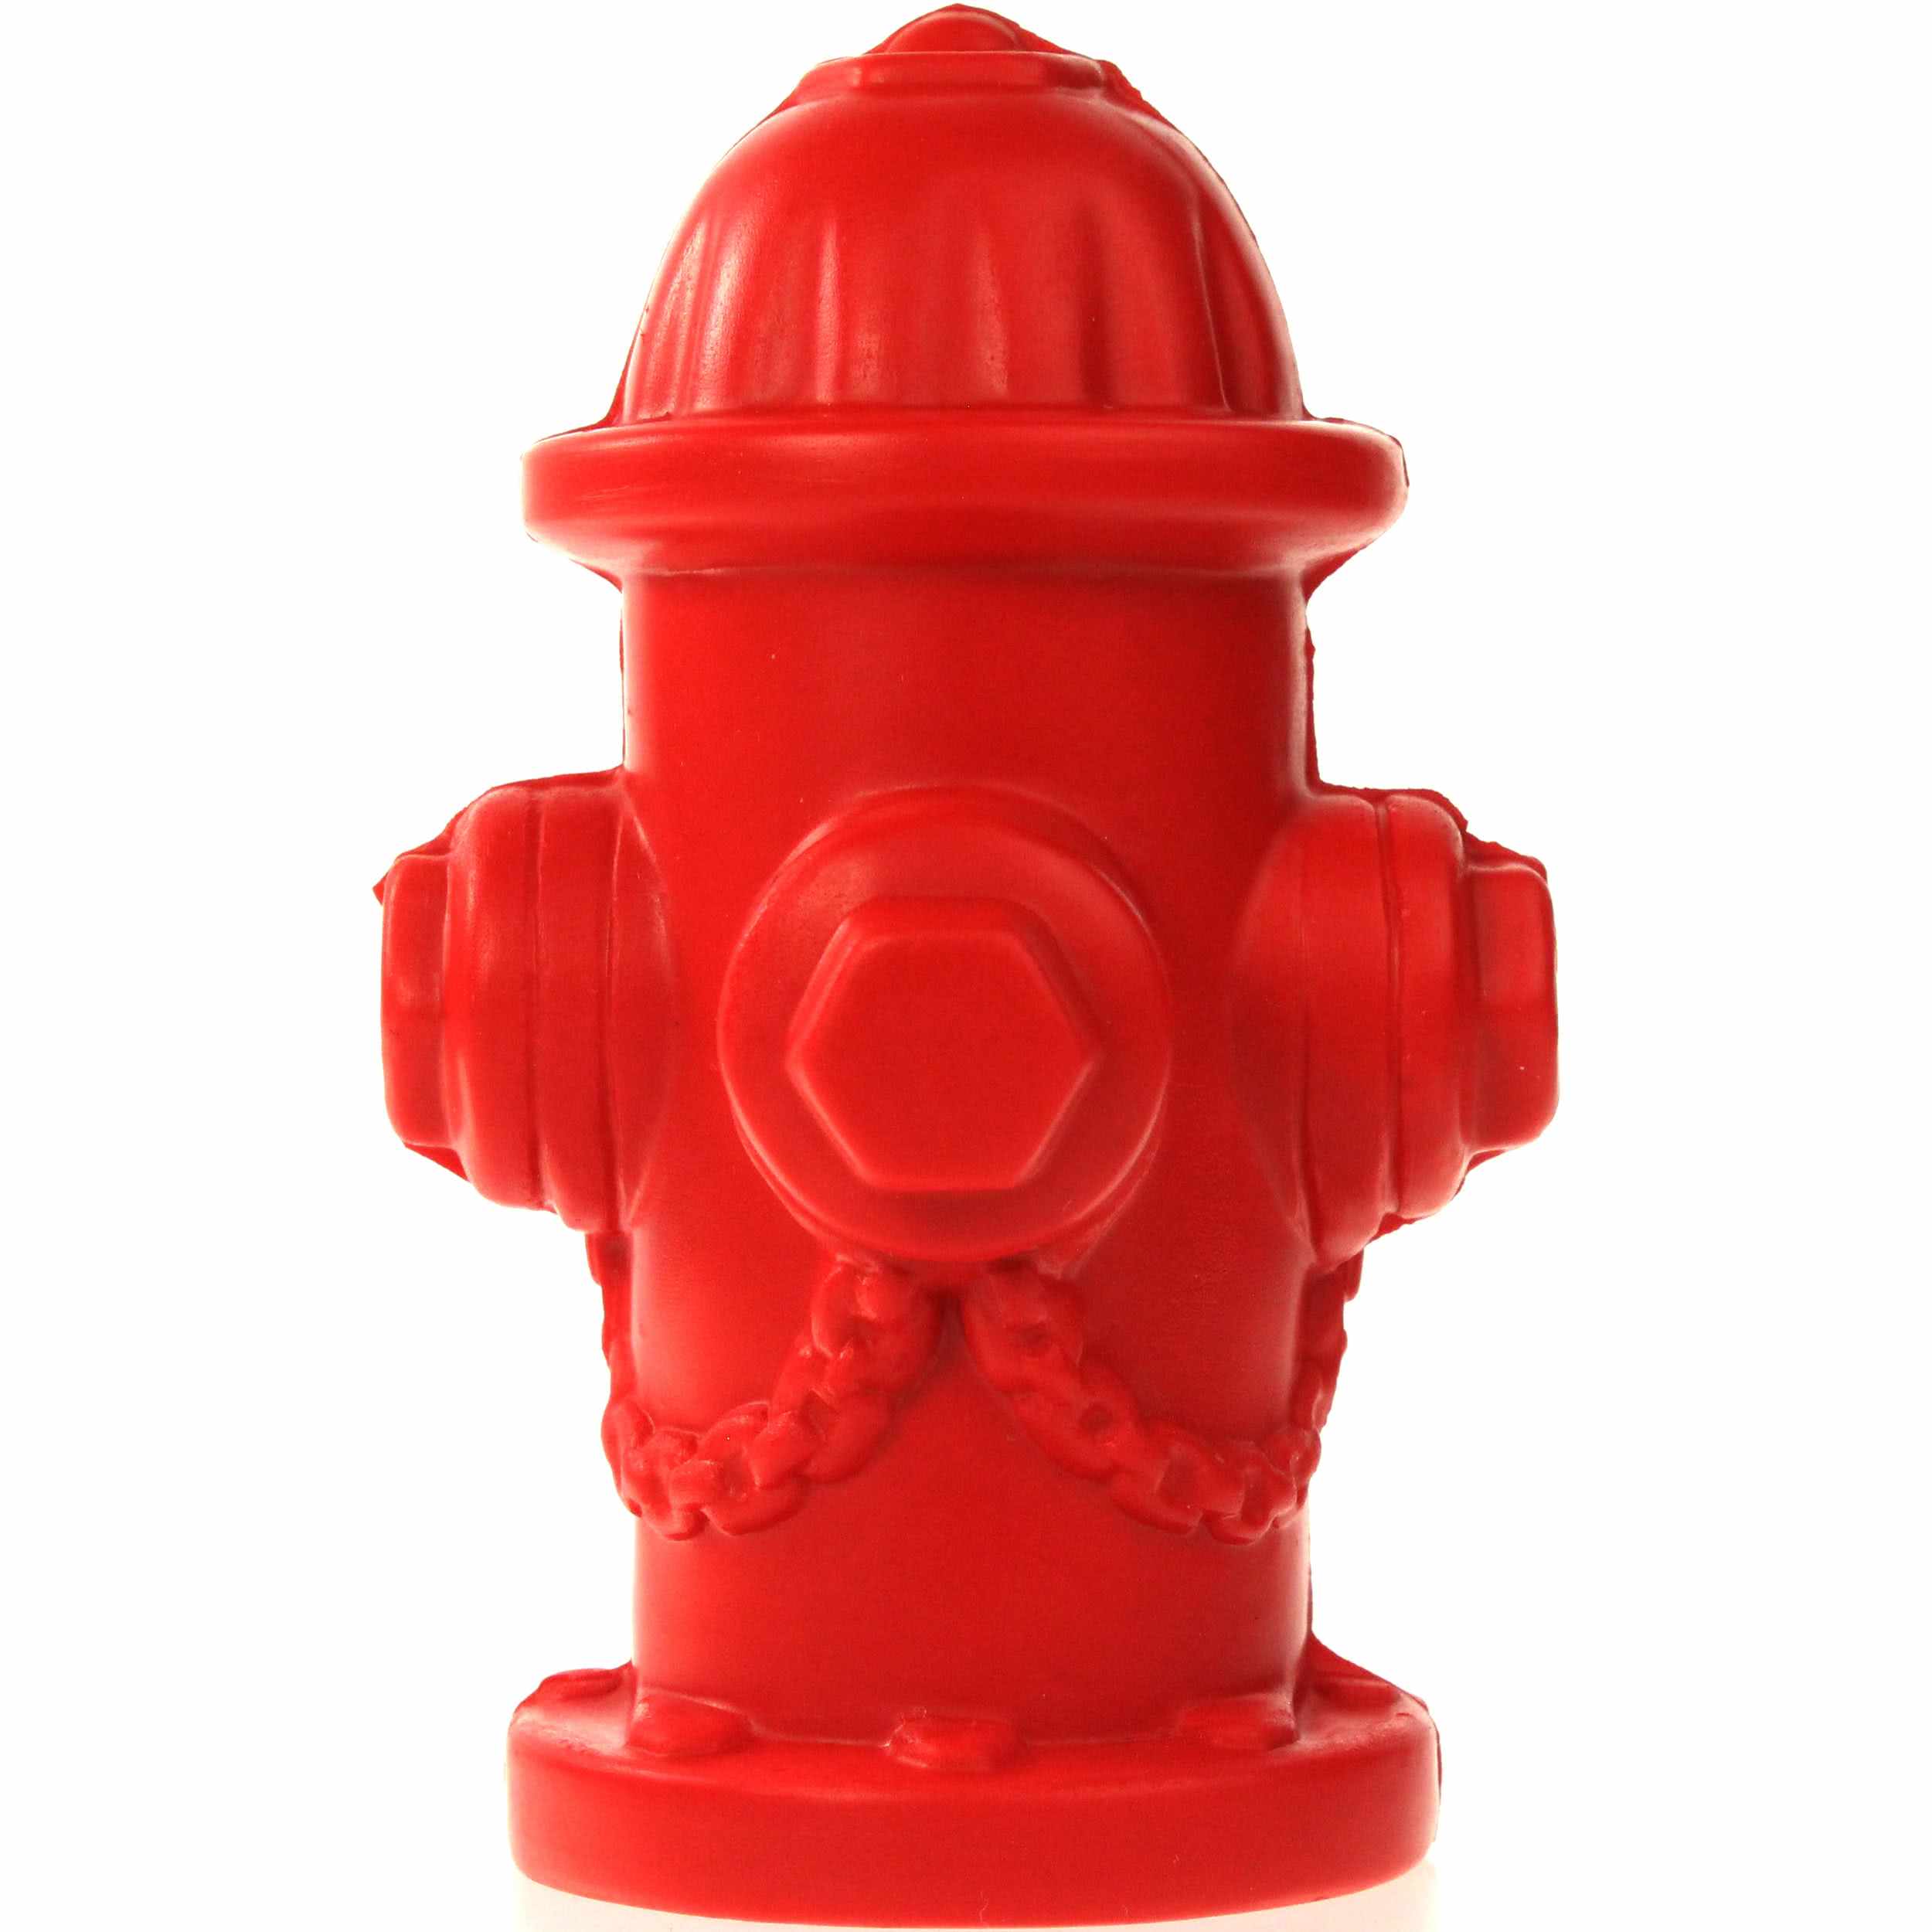 Promotional Fire Hydrant Stress Balls with Custom Logo for $0.90 Ea.